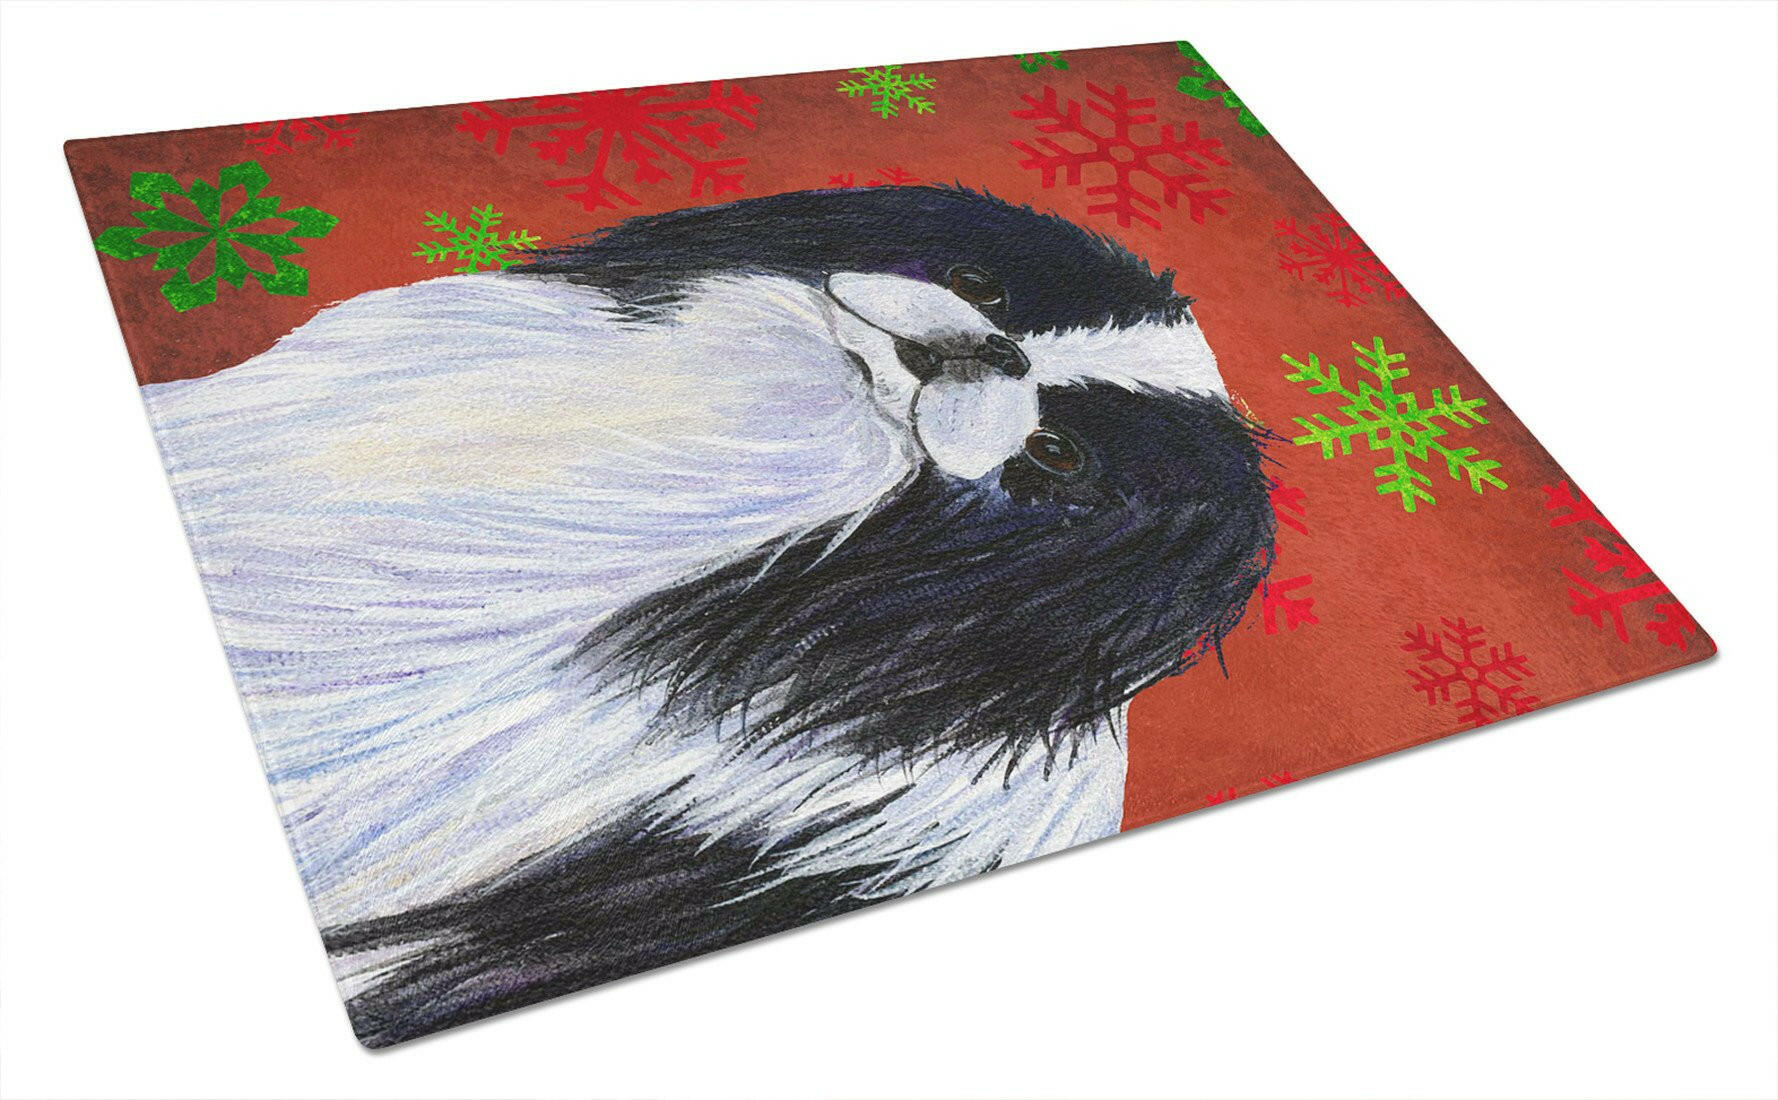 Japanese Chin Red and Green Snowflakes Christmas Glass Cutting Board Large by Caroline's Treasures